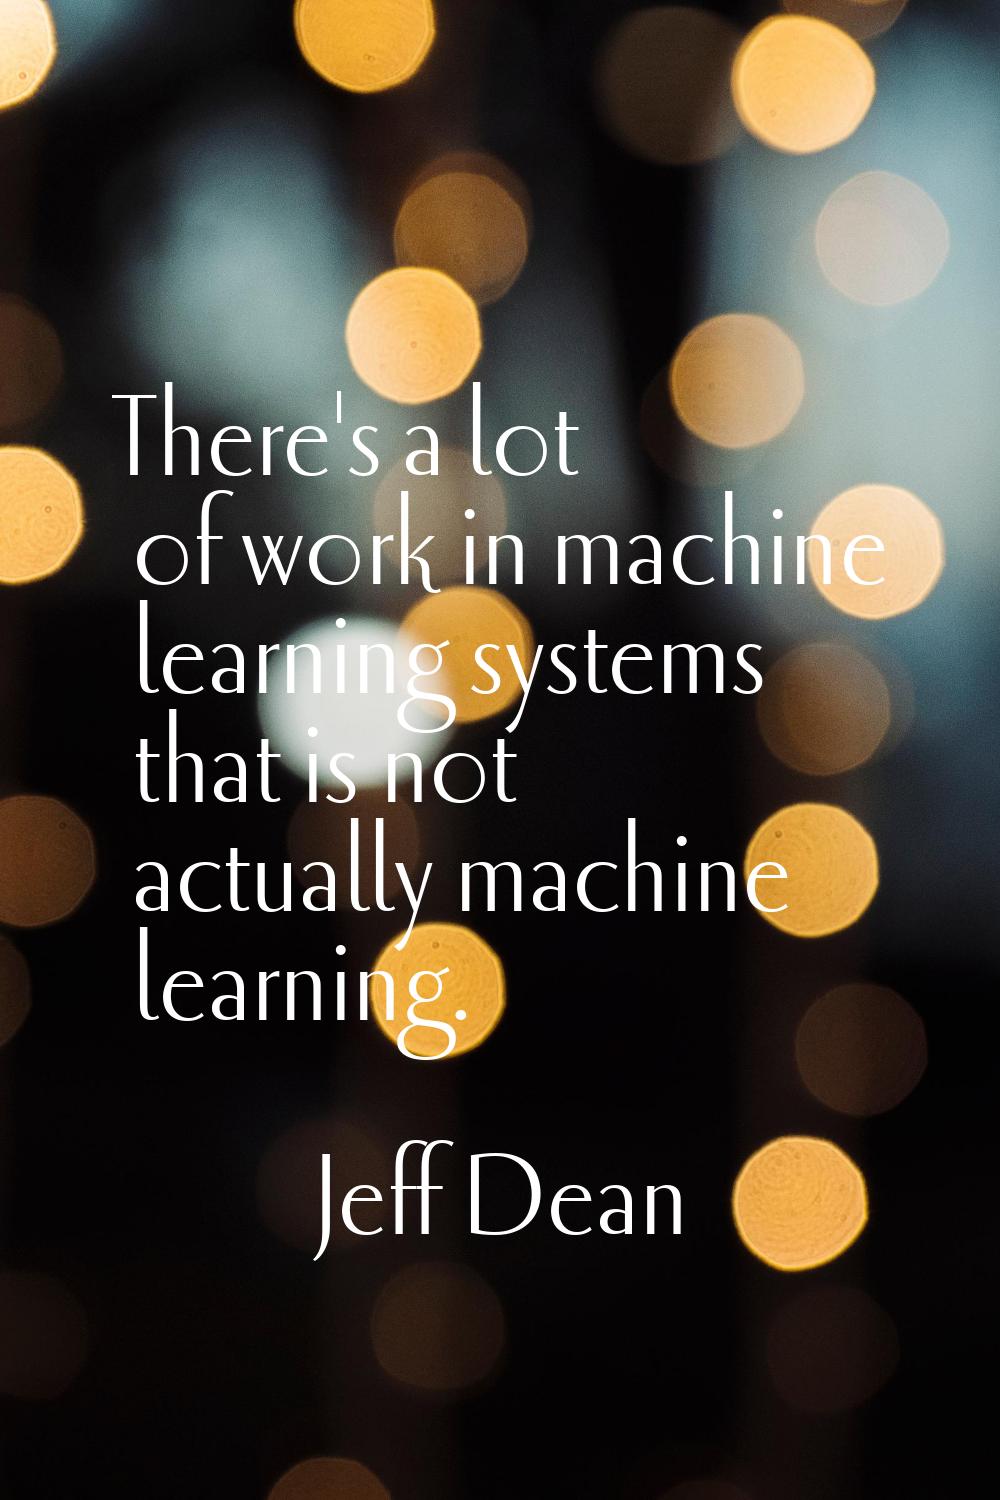 There's a lot of work in machine learning systems that is not actually machine learning.